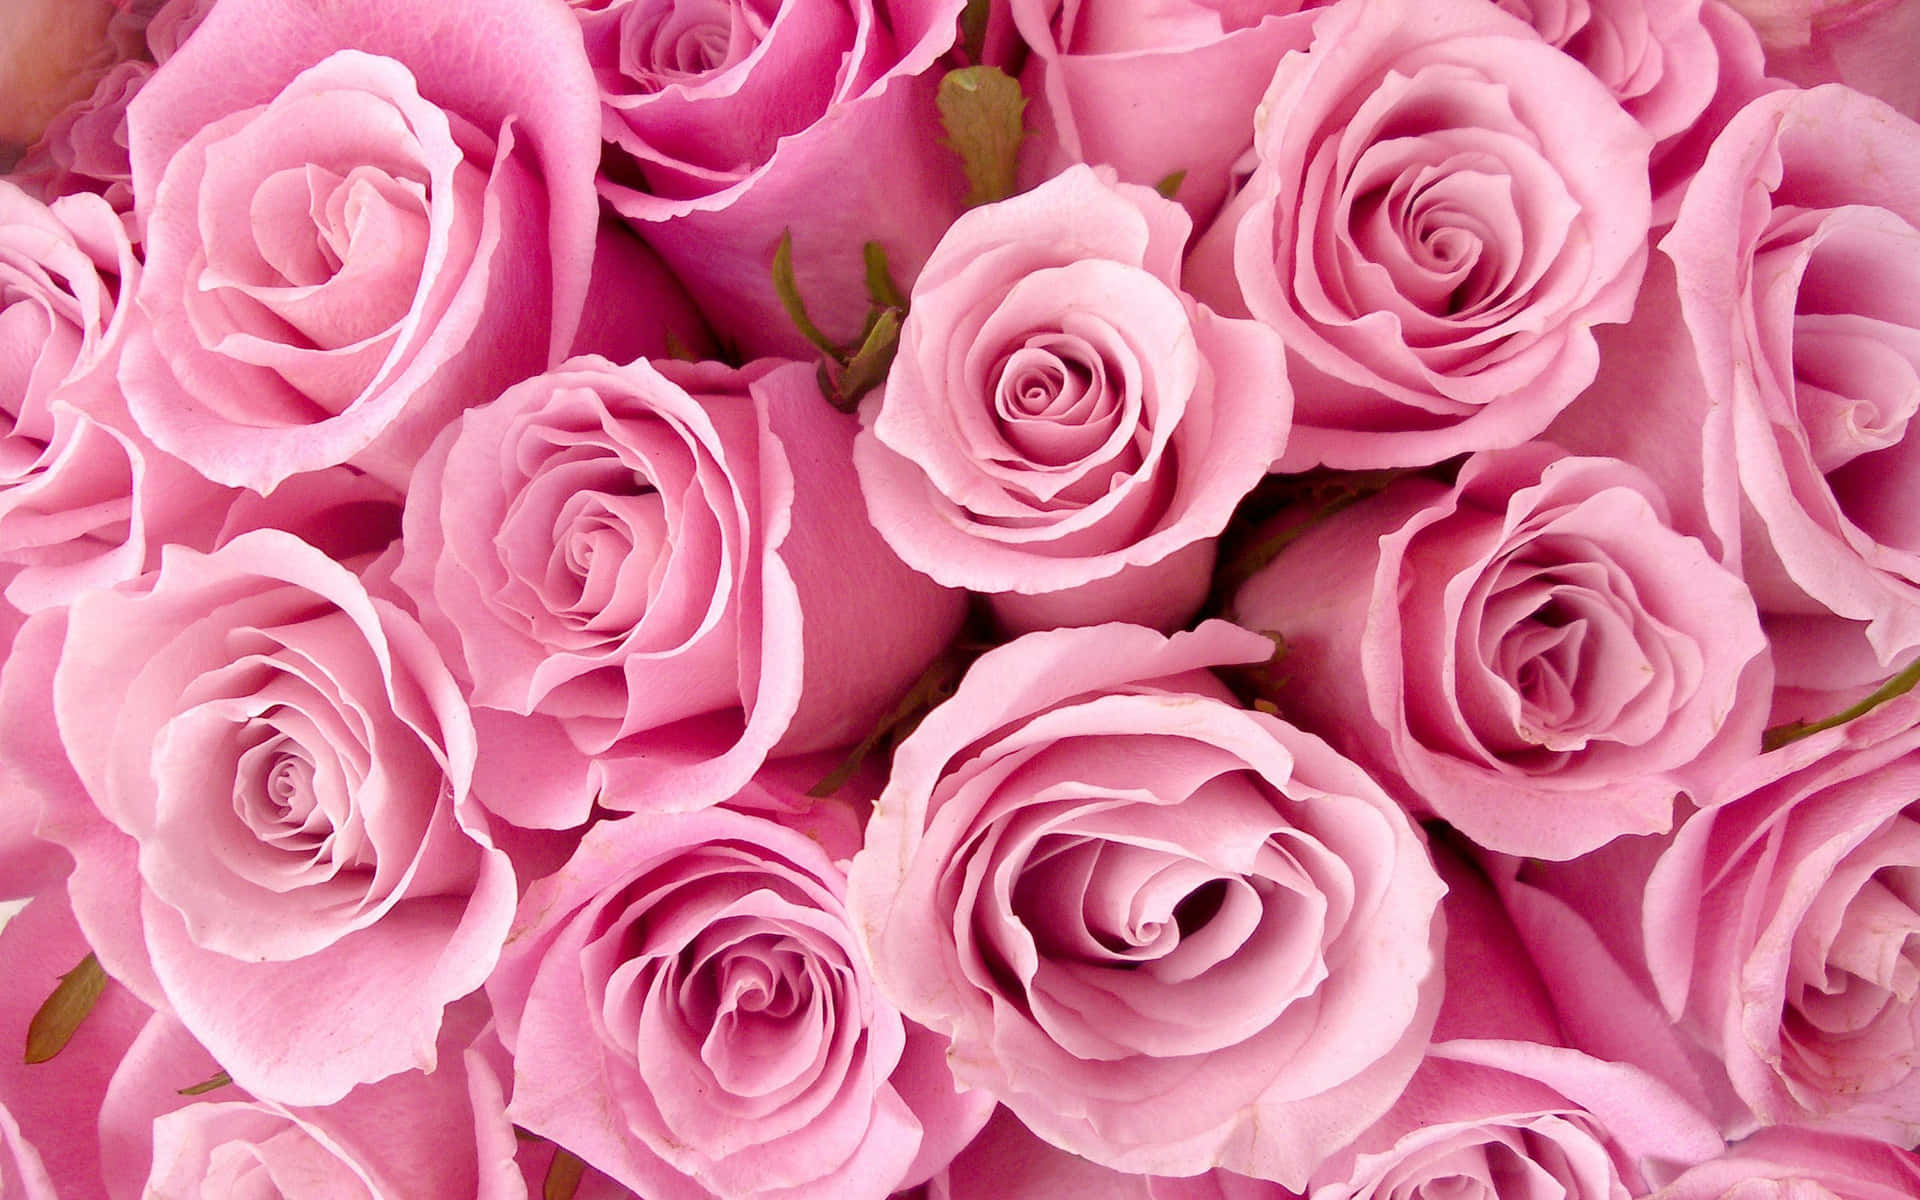 Soft, velvety pink rose that's sure to capture your heart